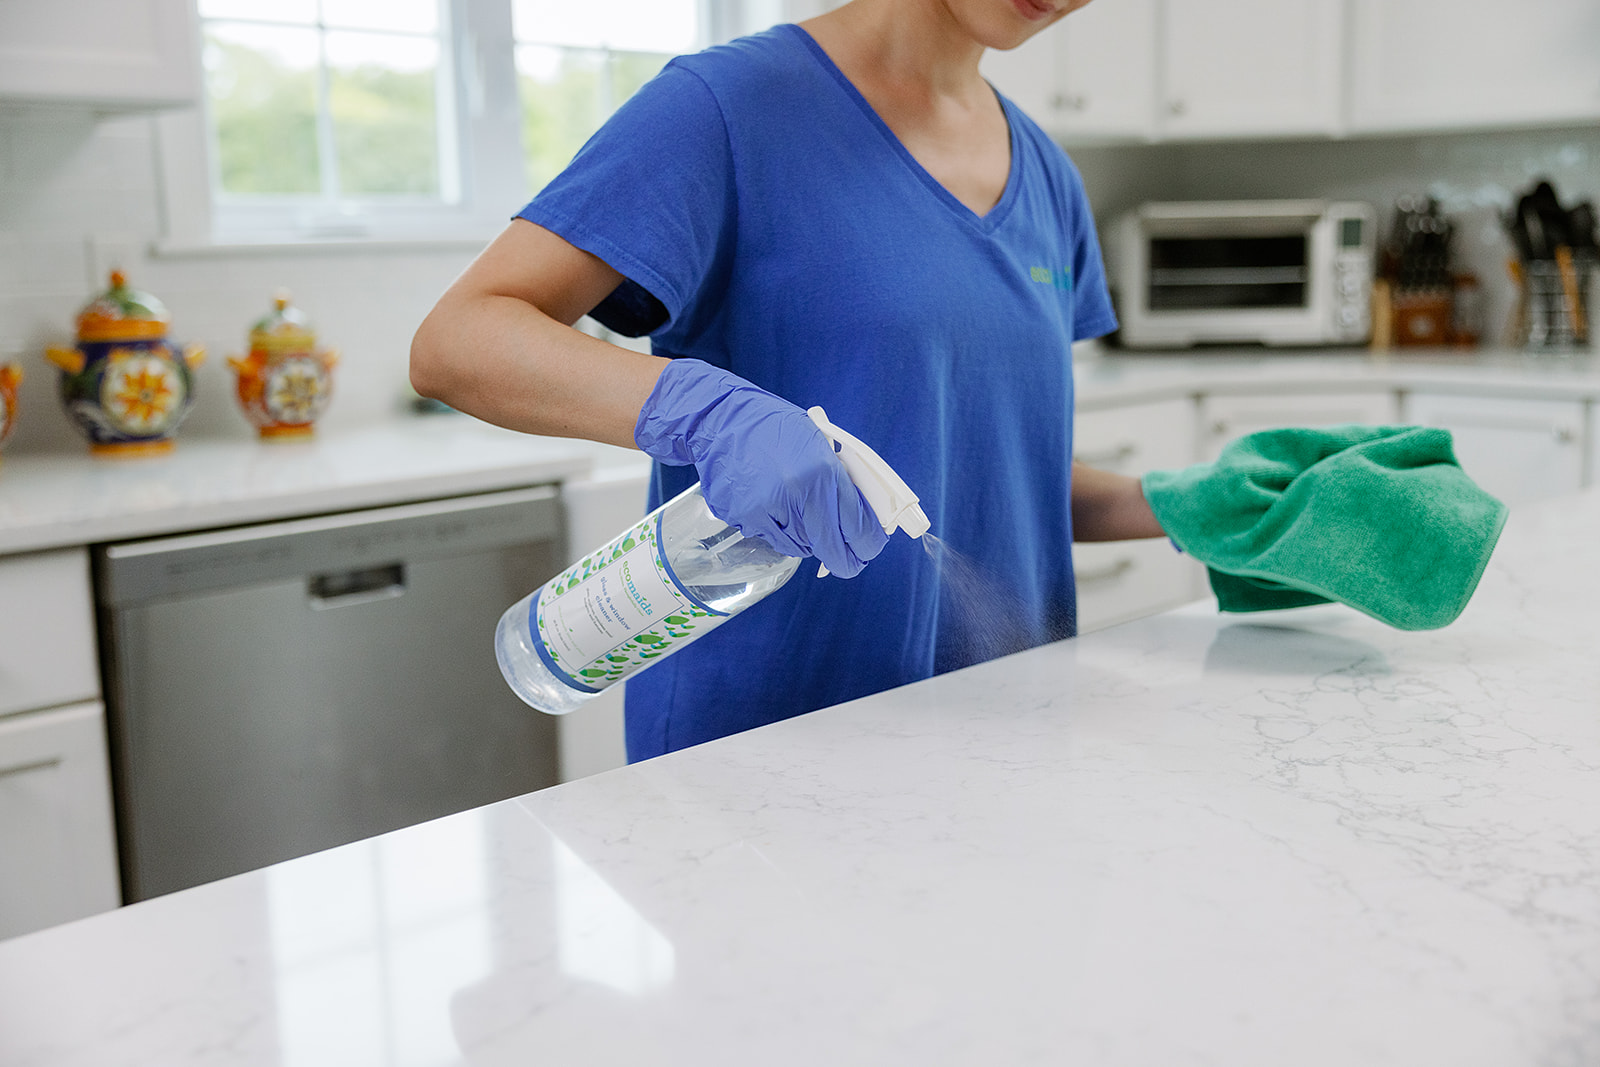 Maid Services in Mooresville